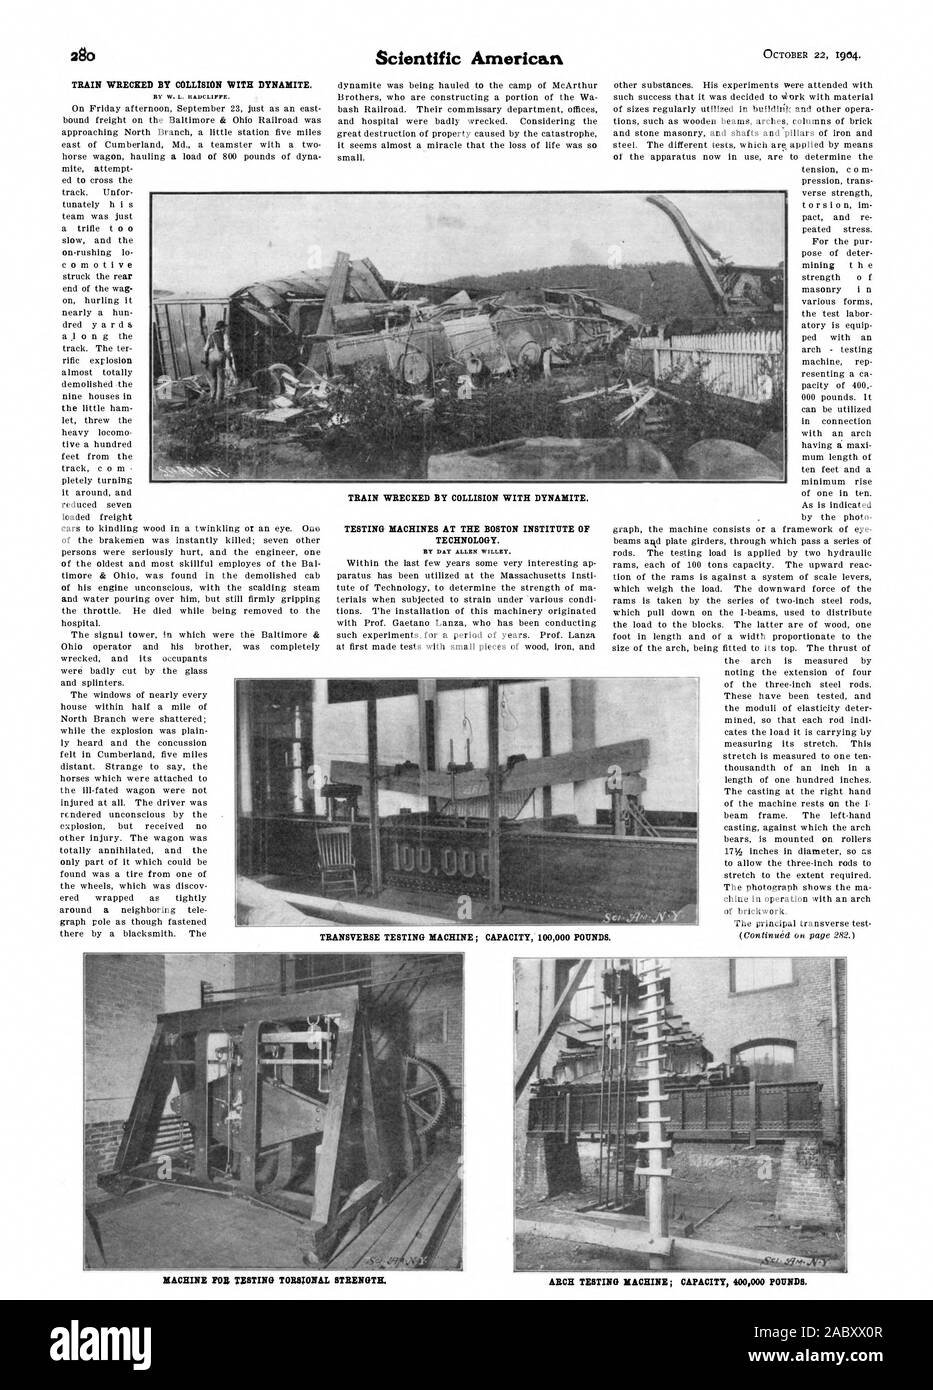 TRAIN WRECKED BY COLLISION WITH DYNAMITE. BY W. L. RADCLIFFE. TESTING MACHINES AT THE BOSTON INSTITUTE OF TECHNOLOGY. BY DAY ALLEN WILLEY. TRAIN WRECKED BY COLLISION WITH DYNAMITE. TRANSVERSE TESTING MACHINE; CAPACITY 100000 POUNDS. MACHINE POI TESTING TORSIONAL STRENGTH. ARCH TESTING MACHINE; CAPACITY 400000 POUNDS., scientific american, 1904-10-22 Stock Photo